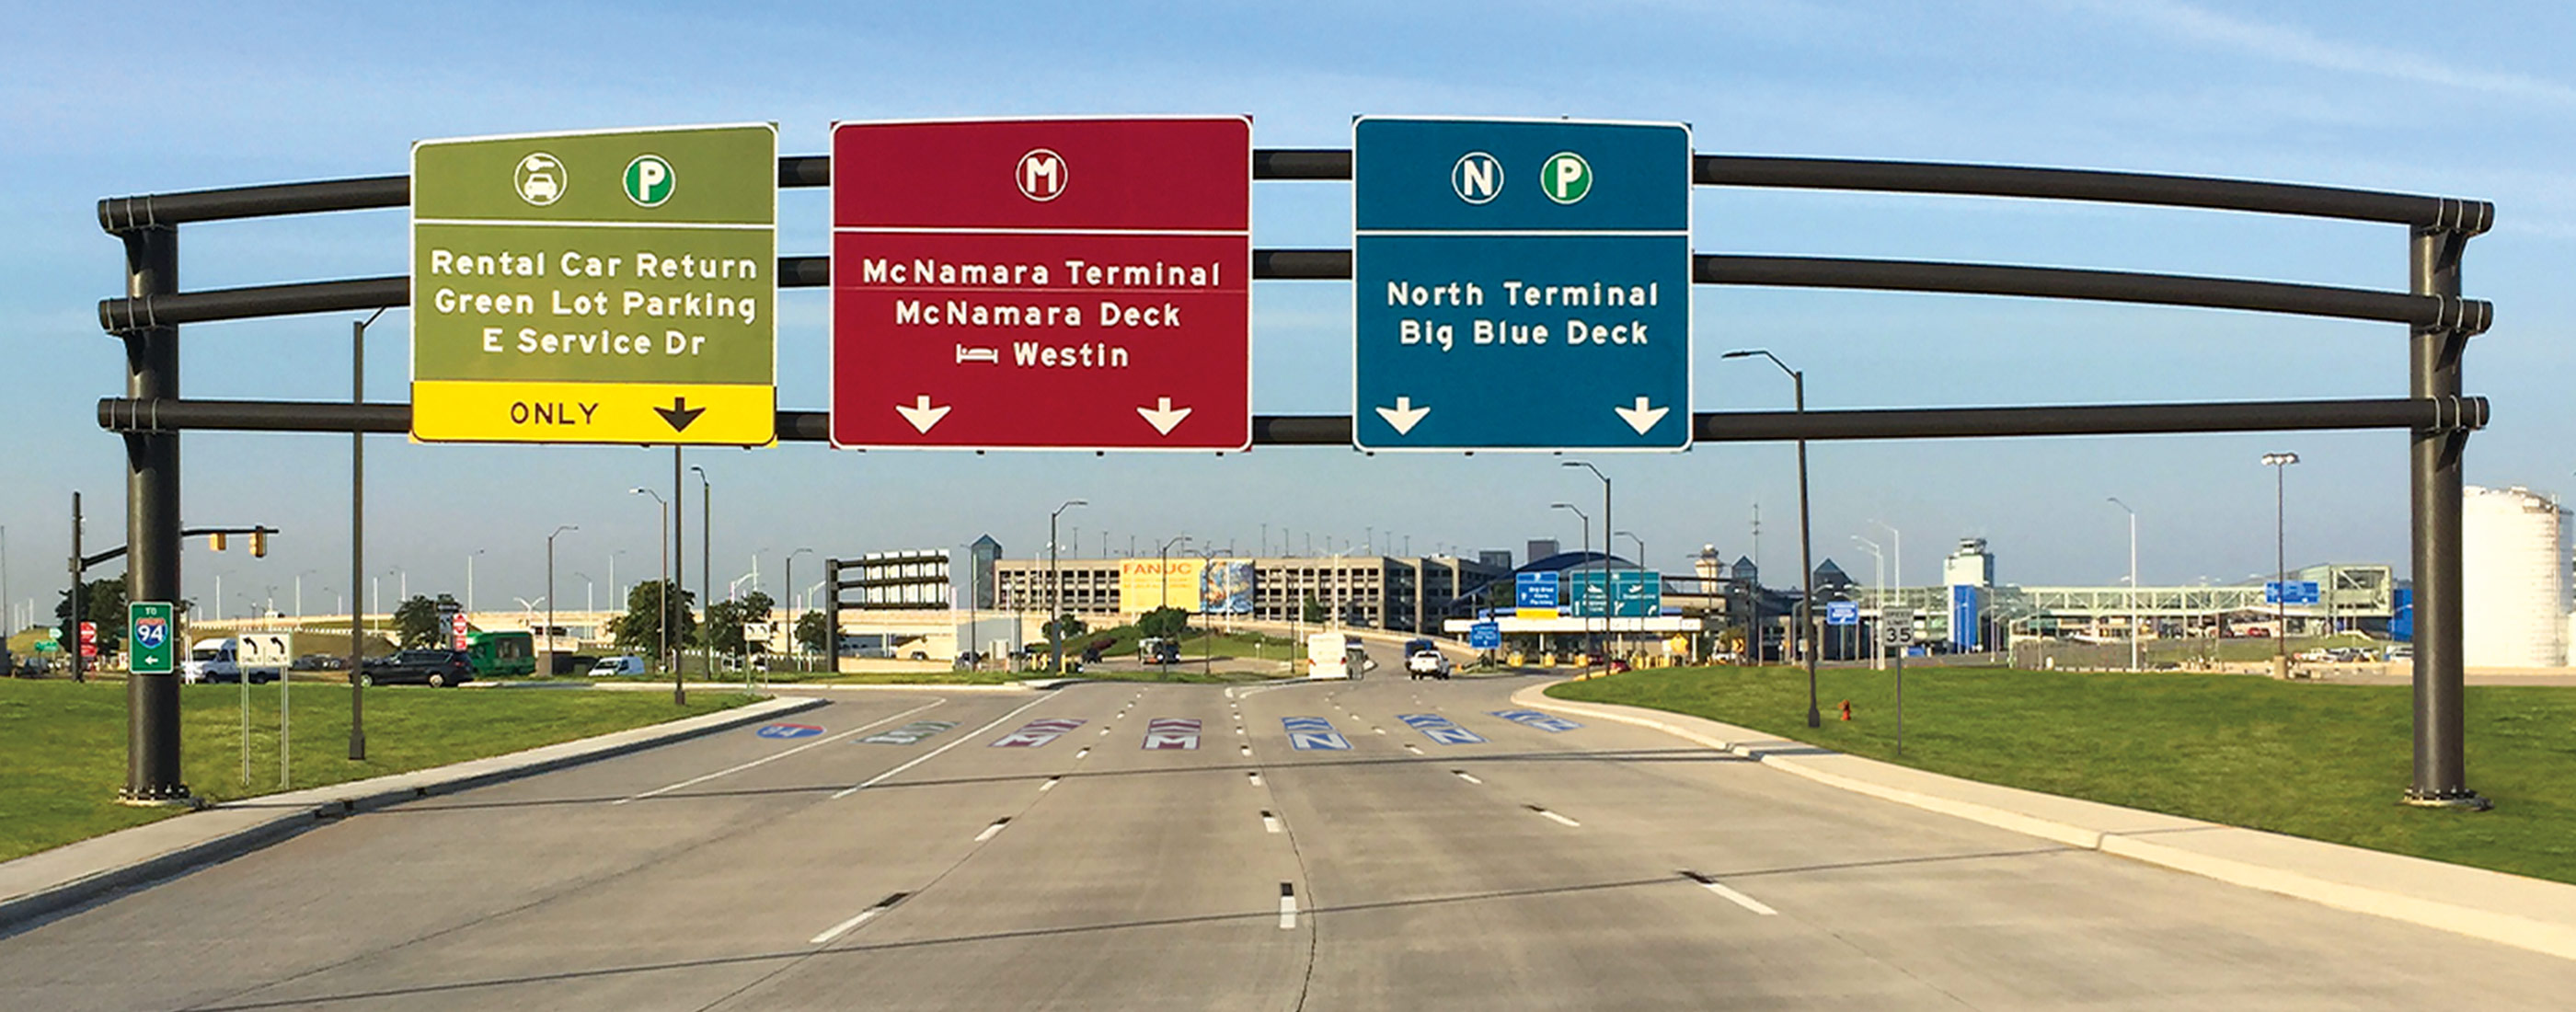 Signage pavement treatment at the Detroit Metro Airport.